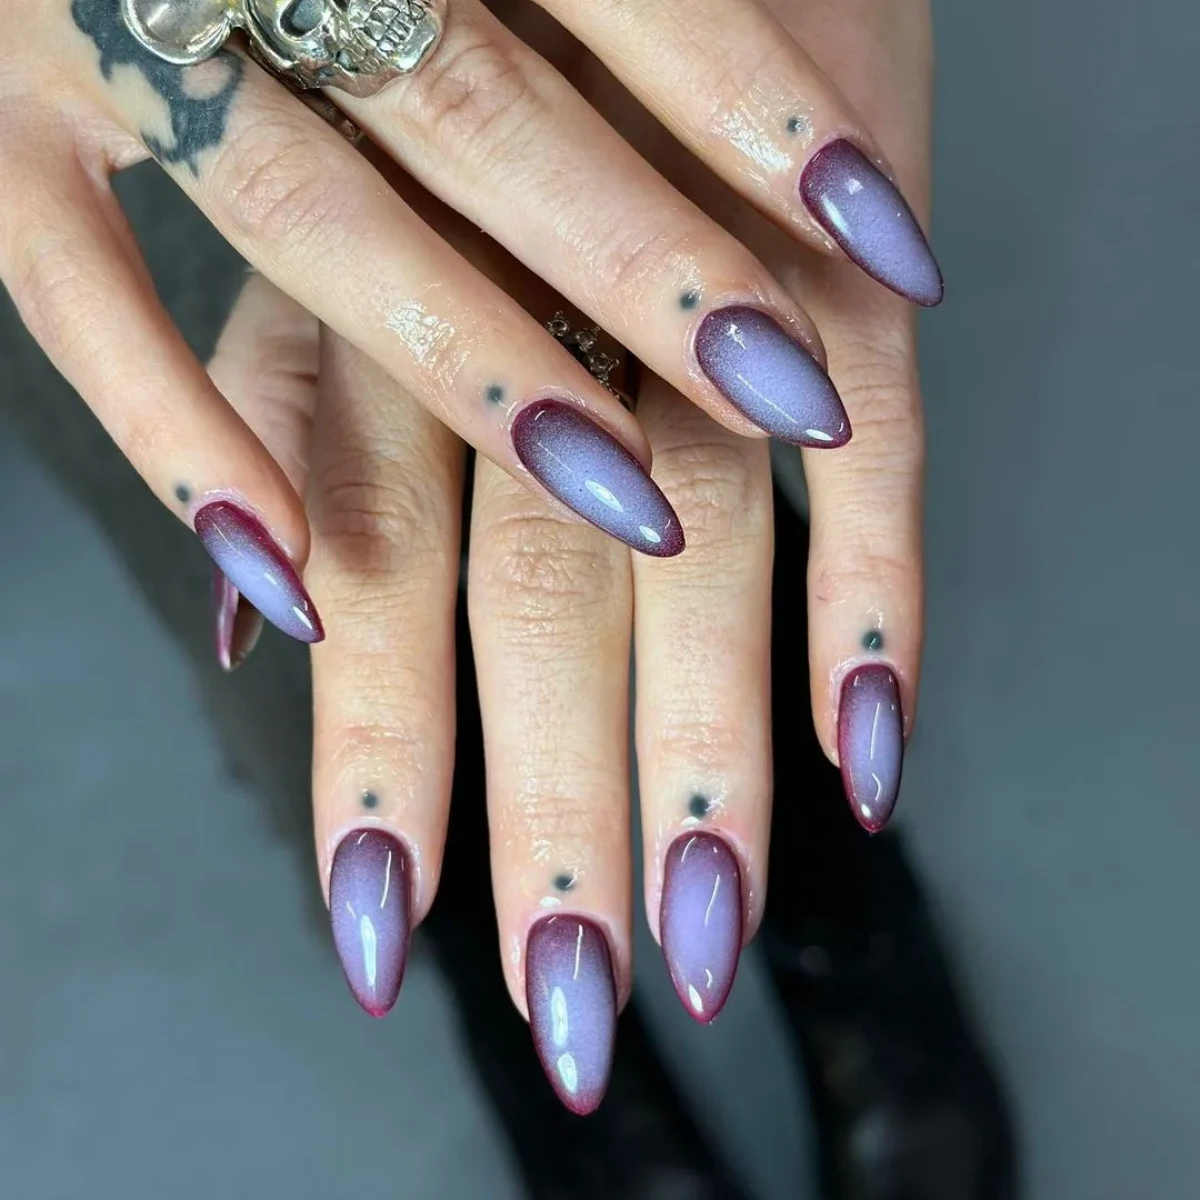 1680979175 996 These are the nail polish trends for summer 2023 that.webp - These are the nail polish trends for summer 2023 that are IN!